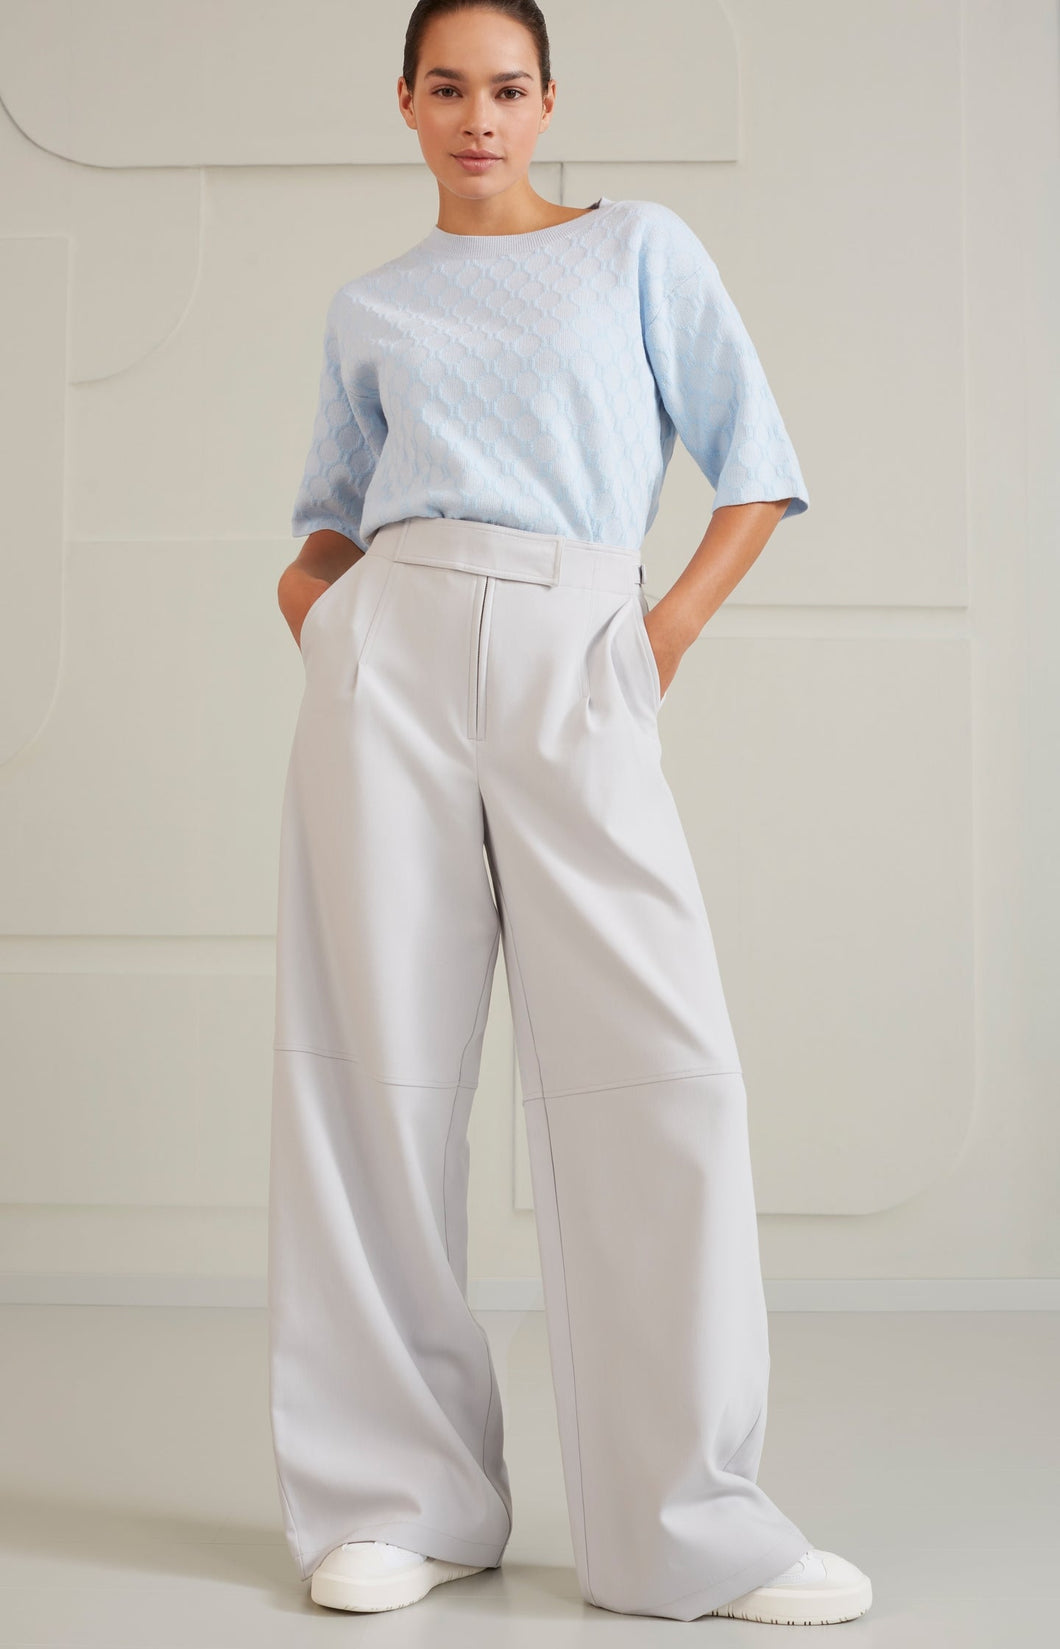 High waist trouser with wide leg, side pockets and zip